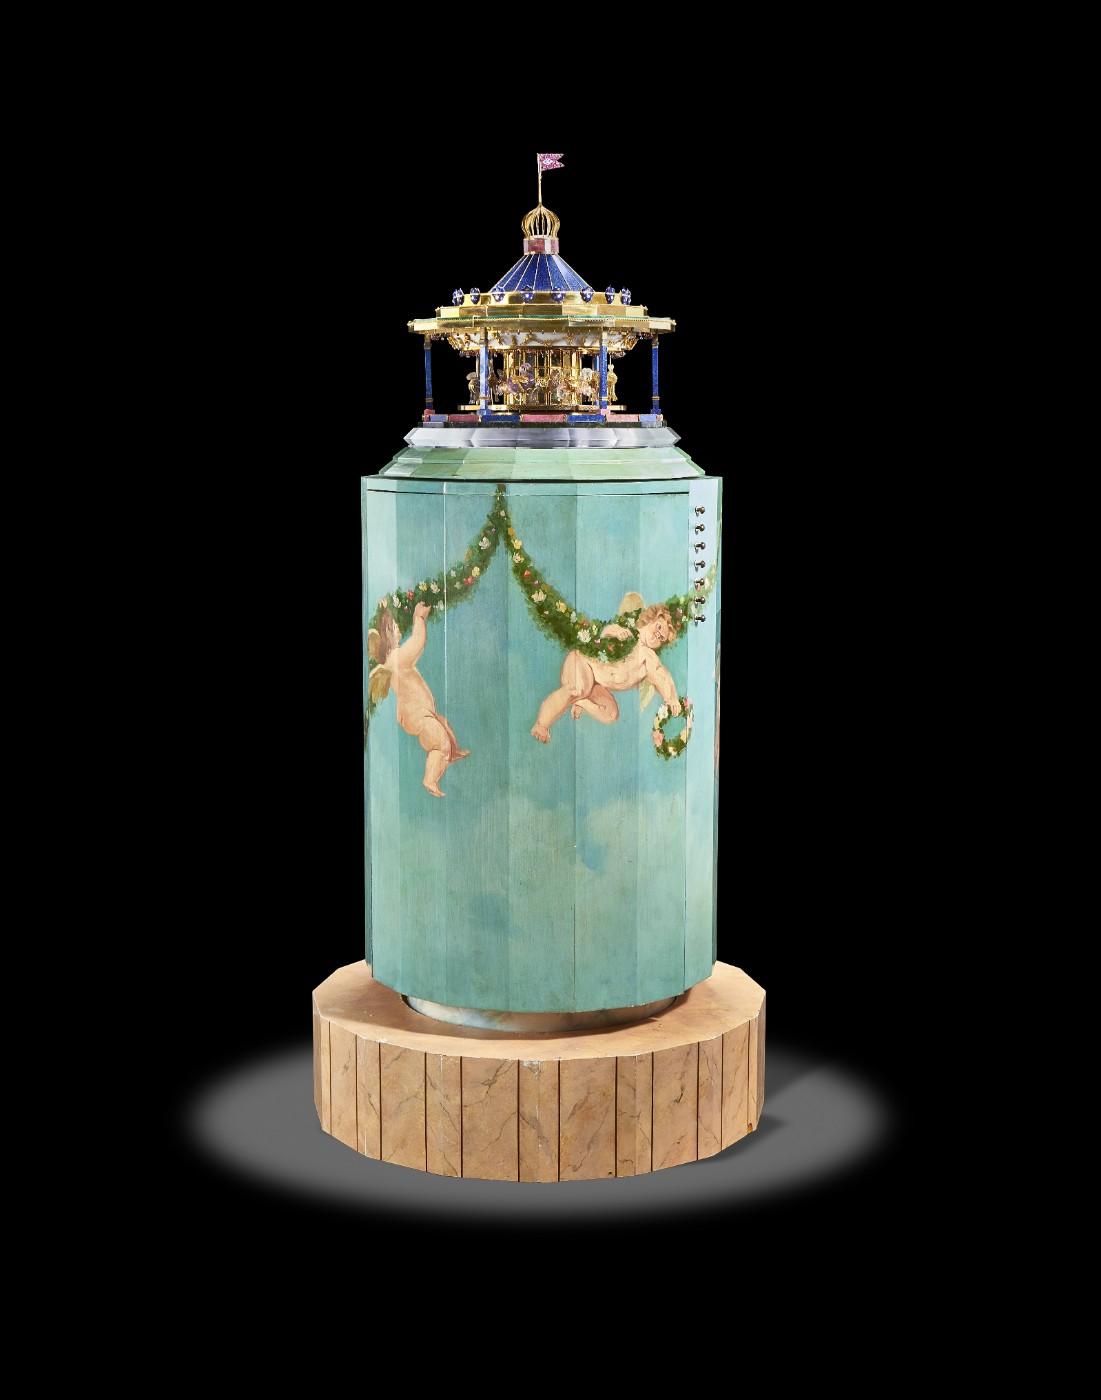 Magnificent Illuminated/Automated Musical Gemstone and Gold Carousel by Andreas von Zadora-Gerlof  Circa 1991 (estimate on request)